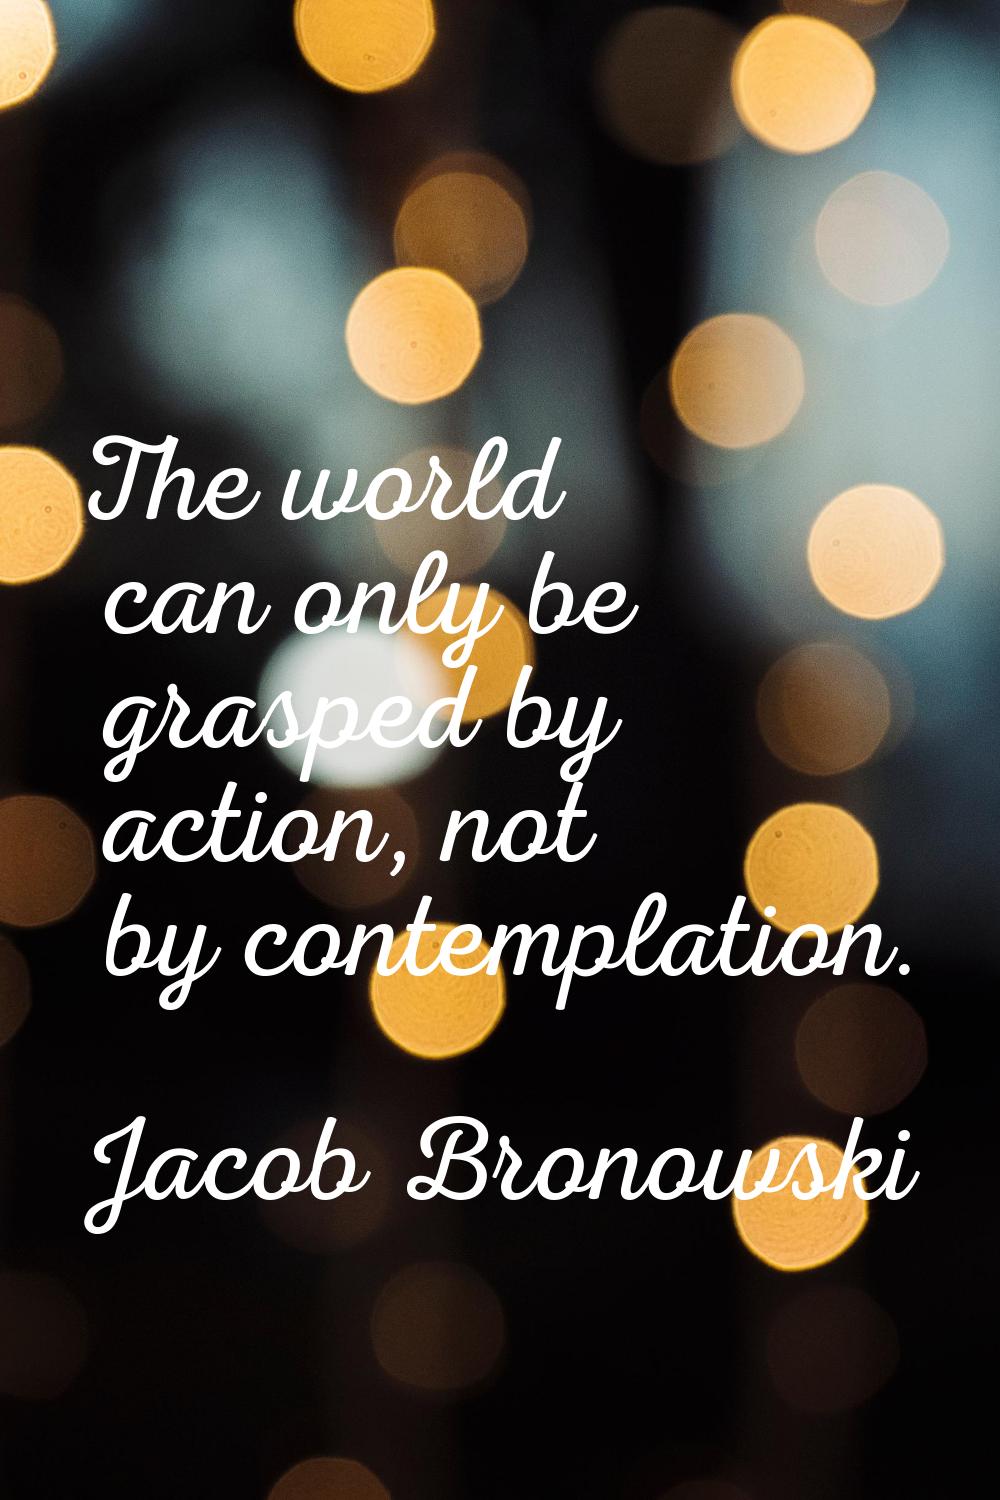 The world can only be grasped by action, not by contemplation.